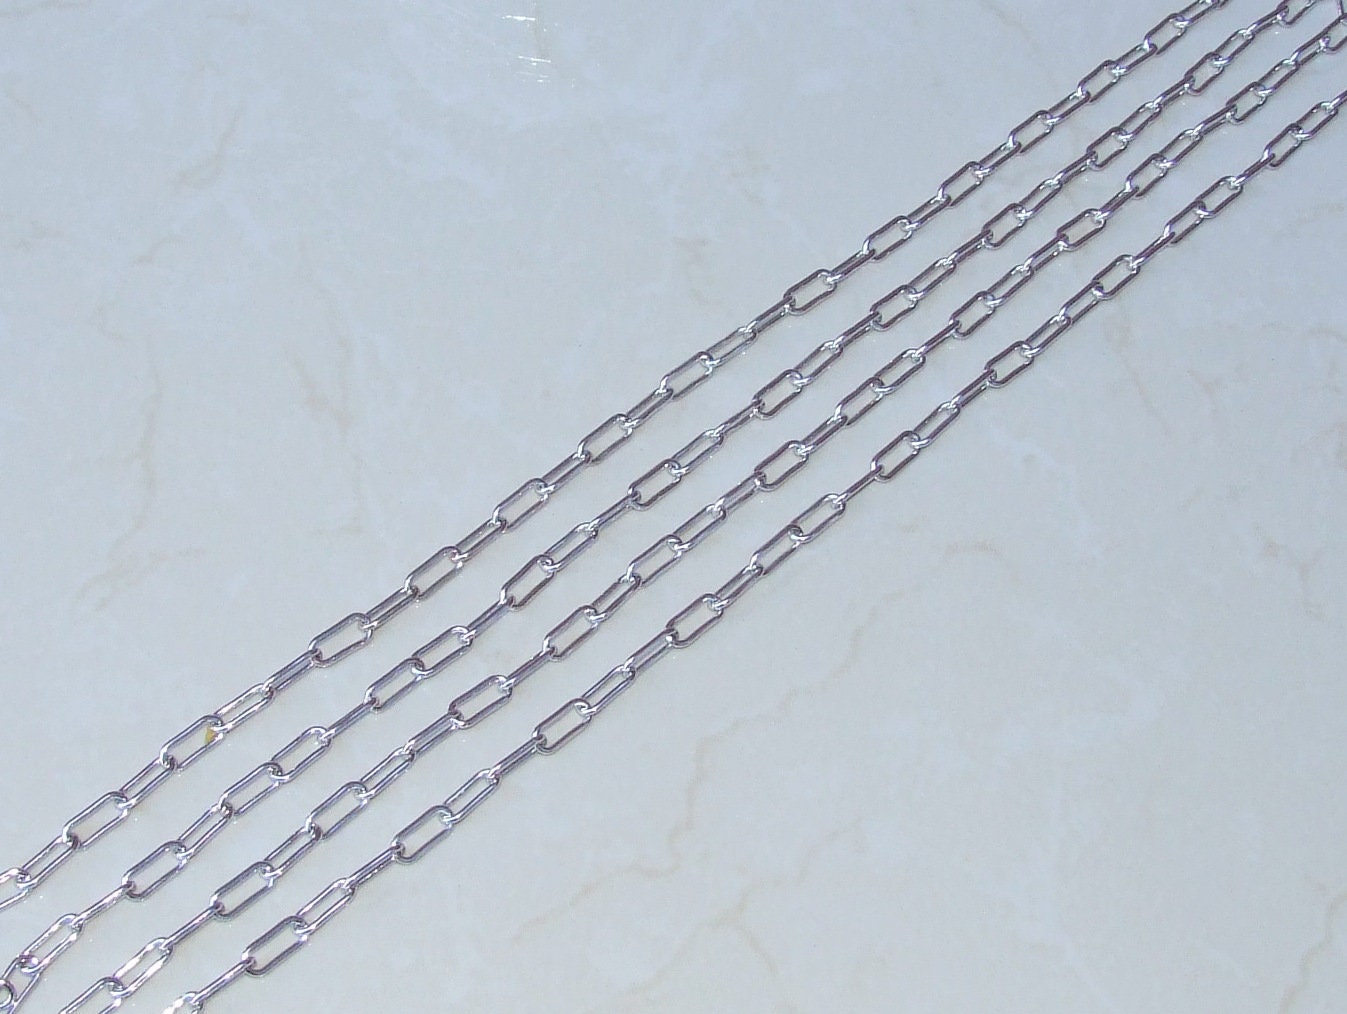 Paper Clip Chain, Oval C Link Cable Chain, Jewelry Chain, Necklace Chain, Body Chain, Bulk Chain, Jewelry Supplies, 16mm x 7mm, 01B-P